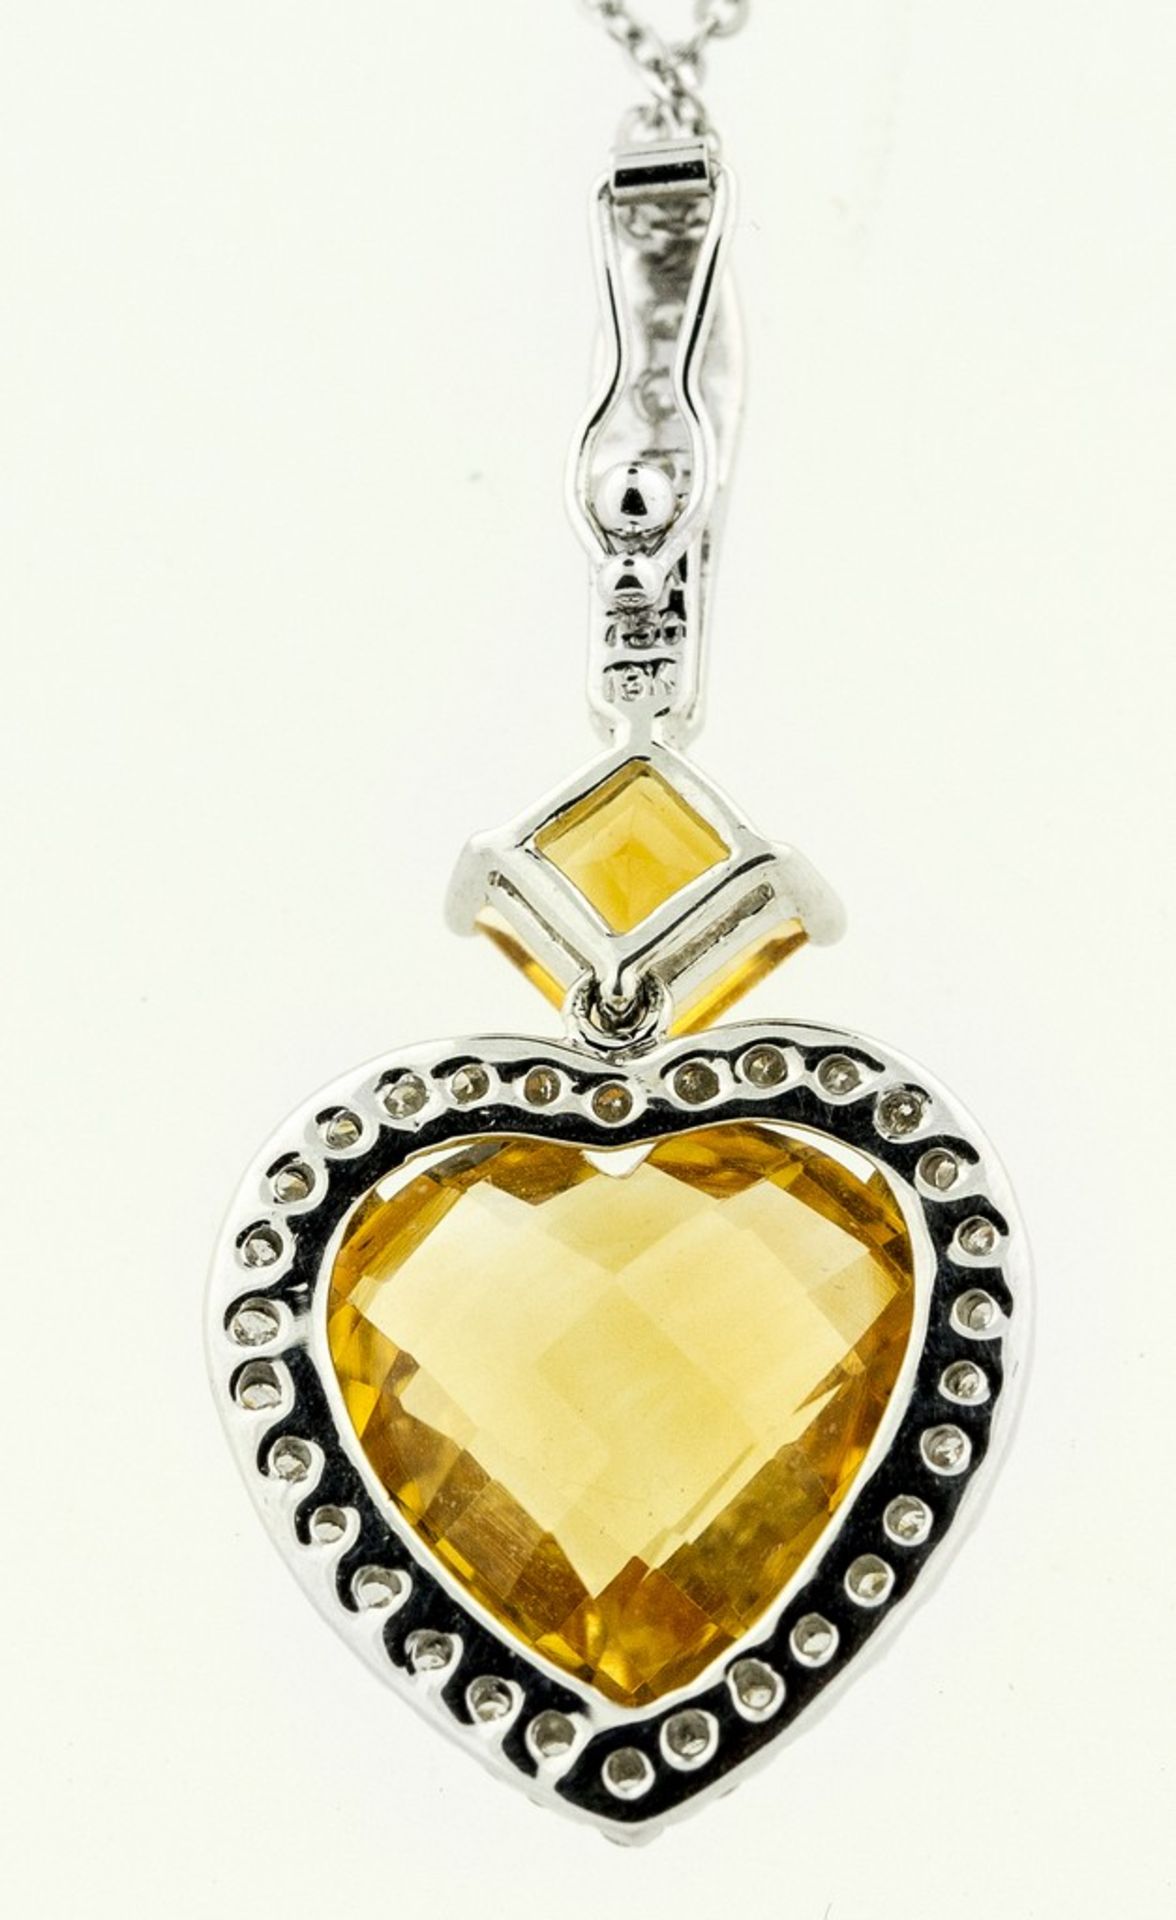 CITRINE AND DIAMOND PENDANT-NECKLACE Suspending a pendant set with a heart-shaped citrine and a - Image 2 of 2